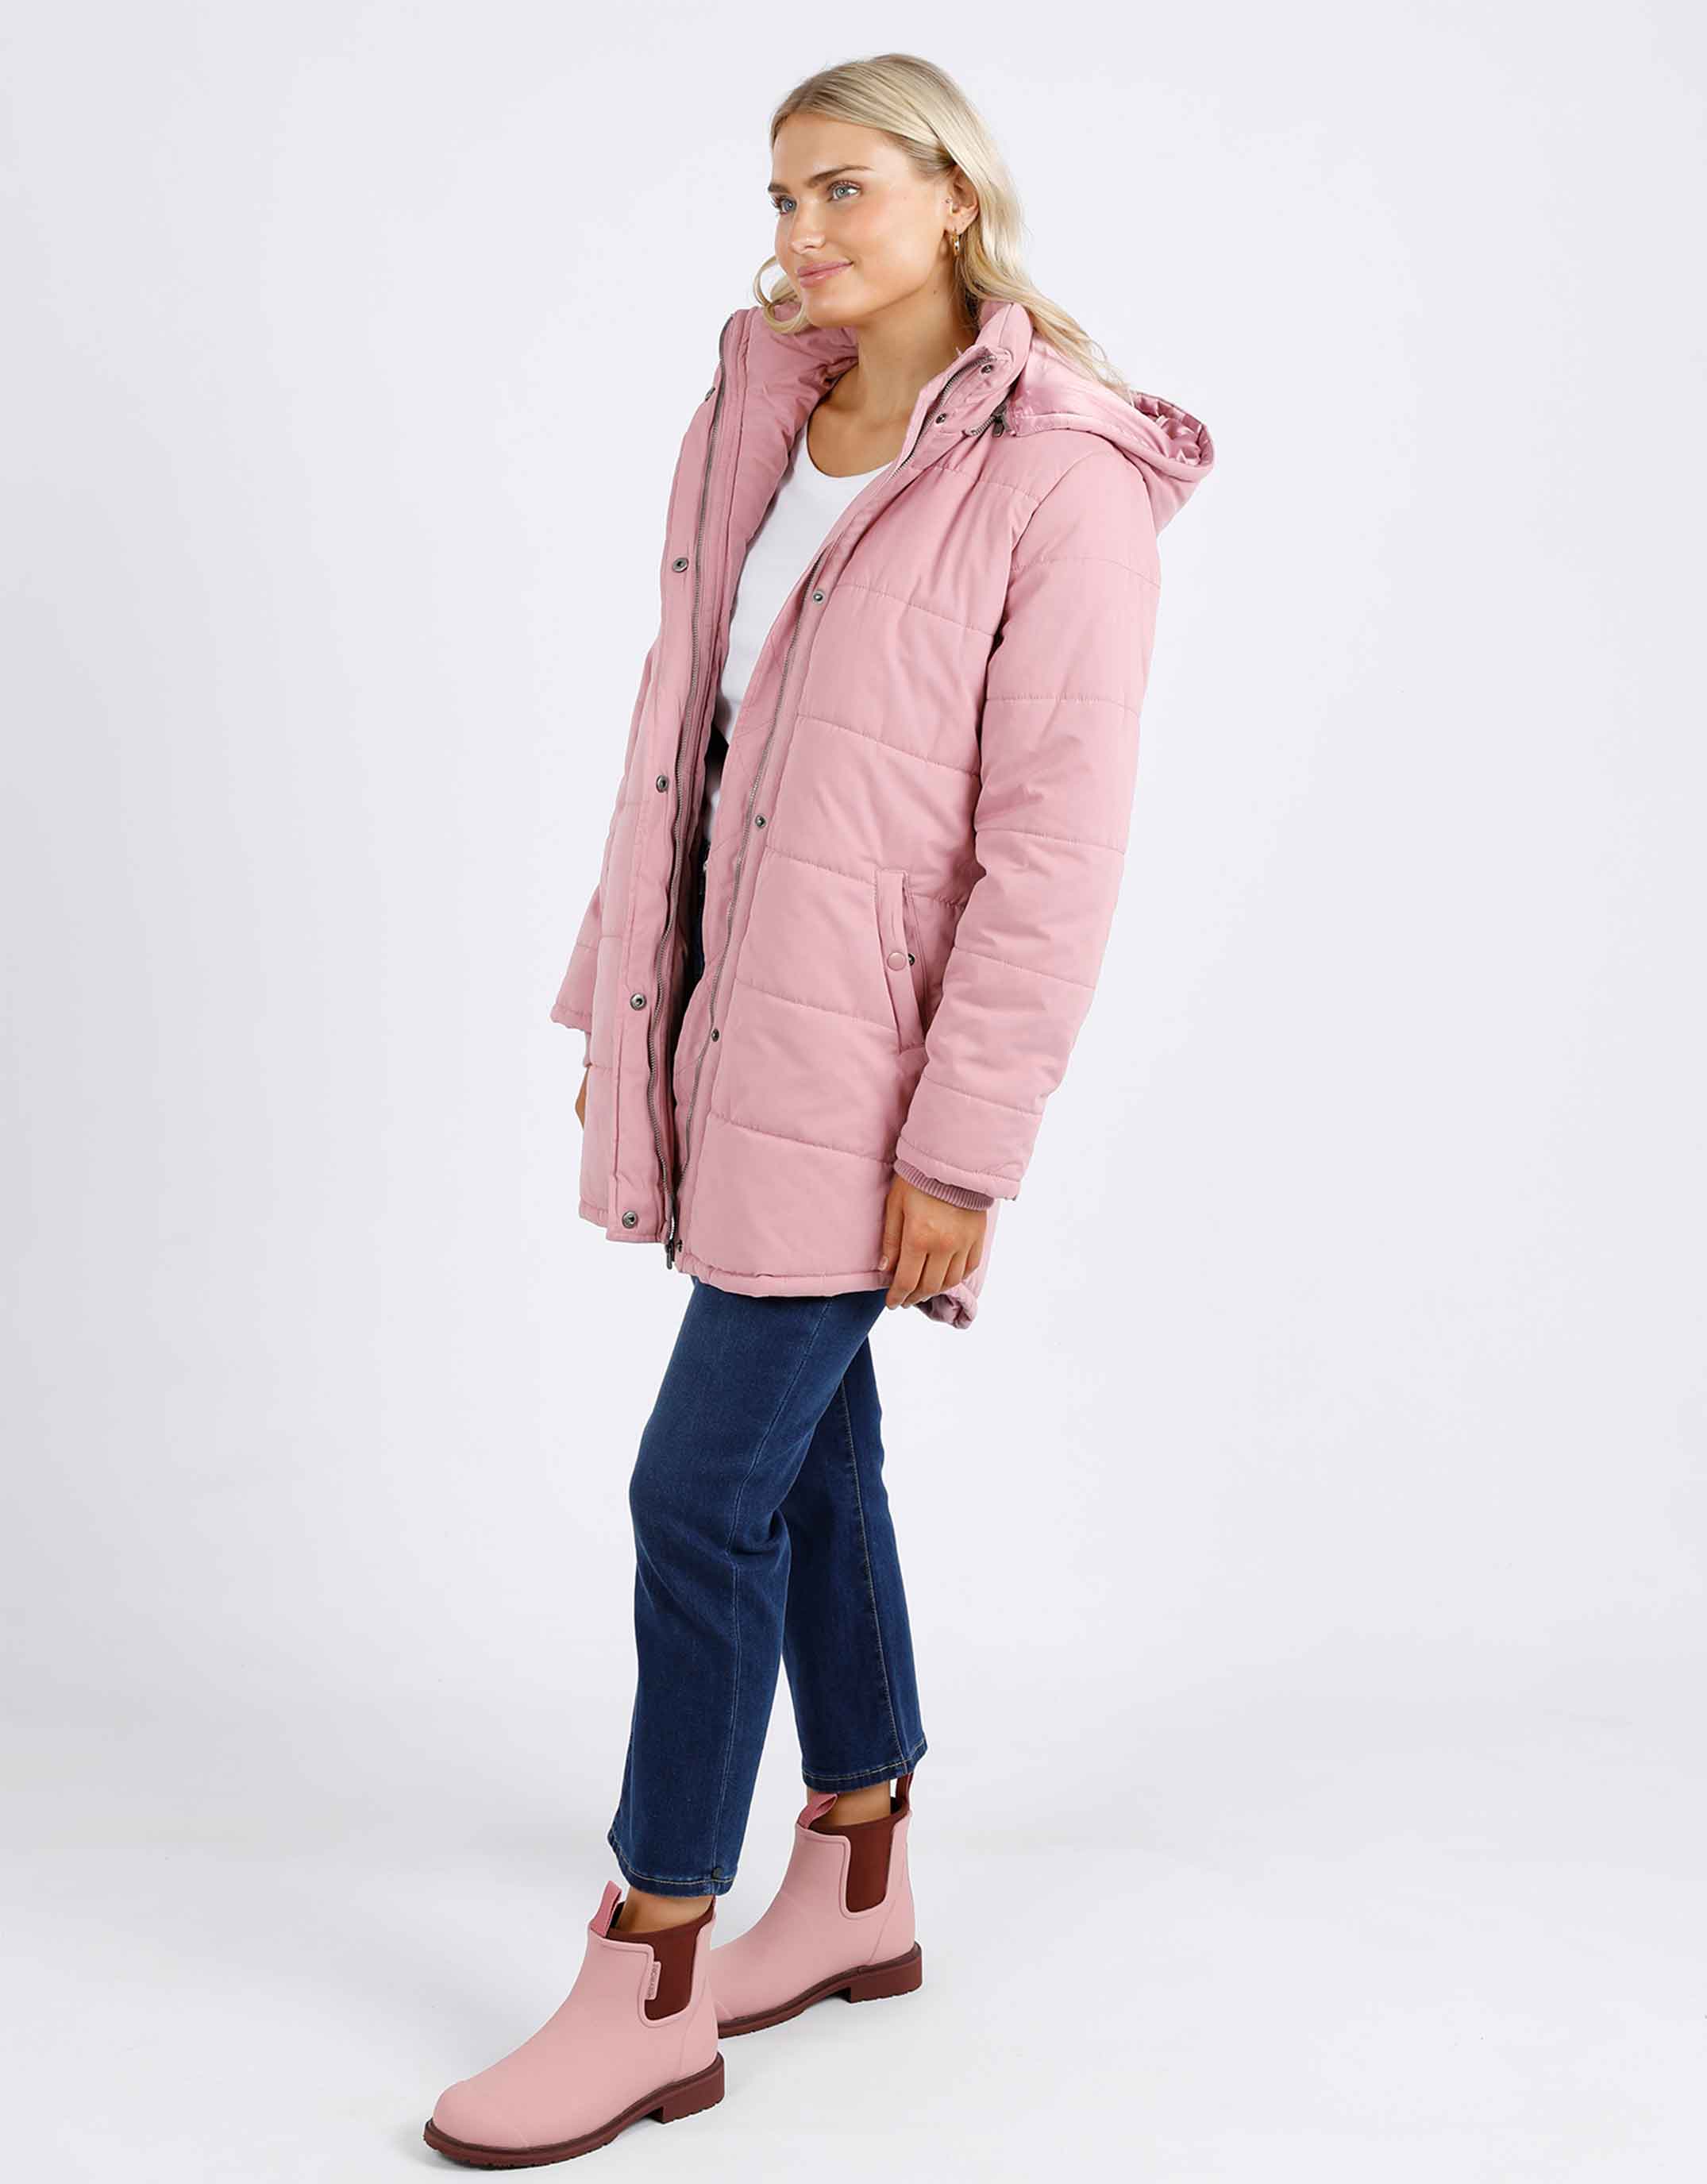 elm-maddie-puffer-jacket-dusty-pink-womens-clothing